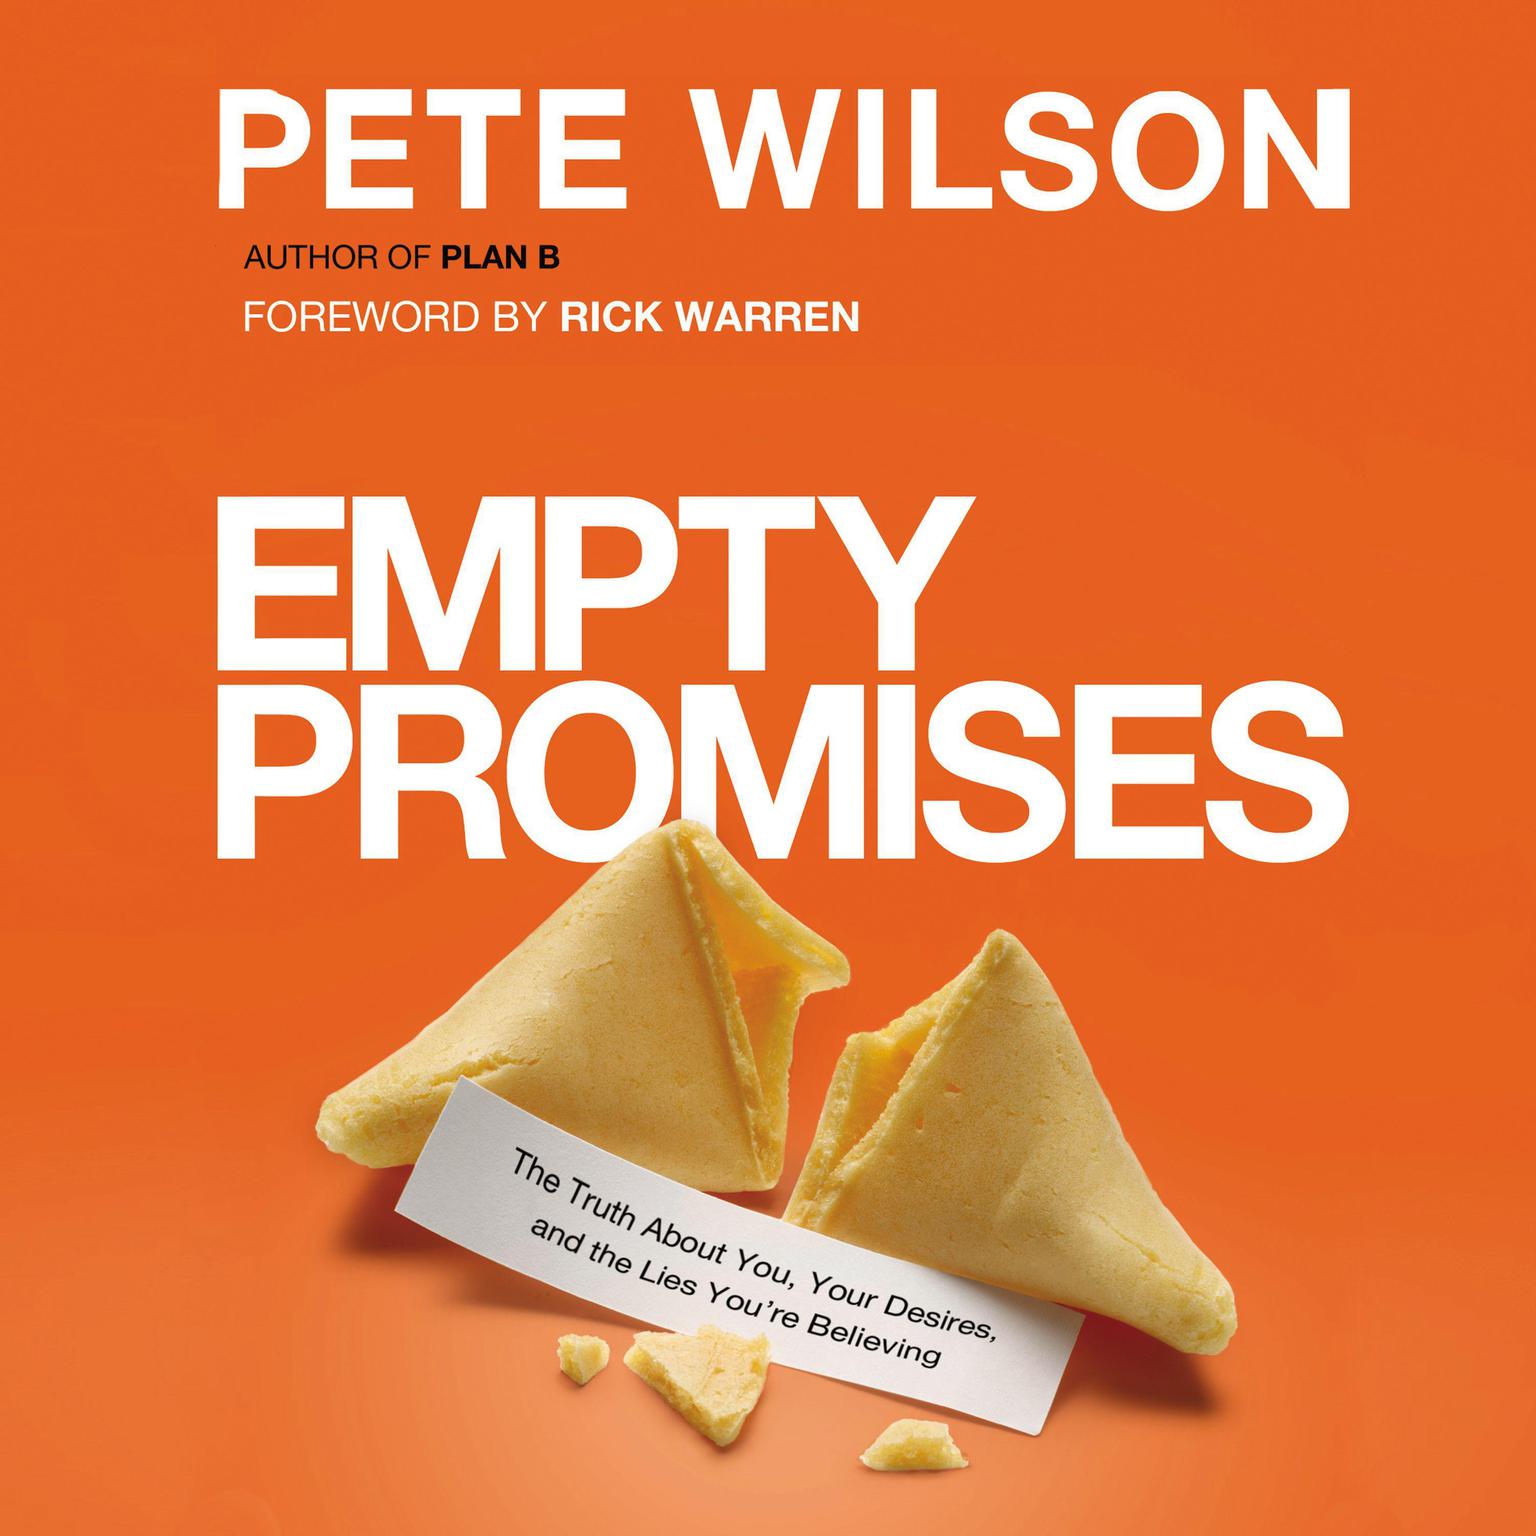 Empty Promises: The Truth About You, Your Desires, and the Lies Youre Believing Audiobook, by Pete Wilson